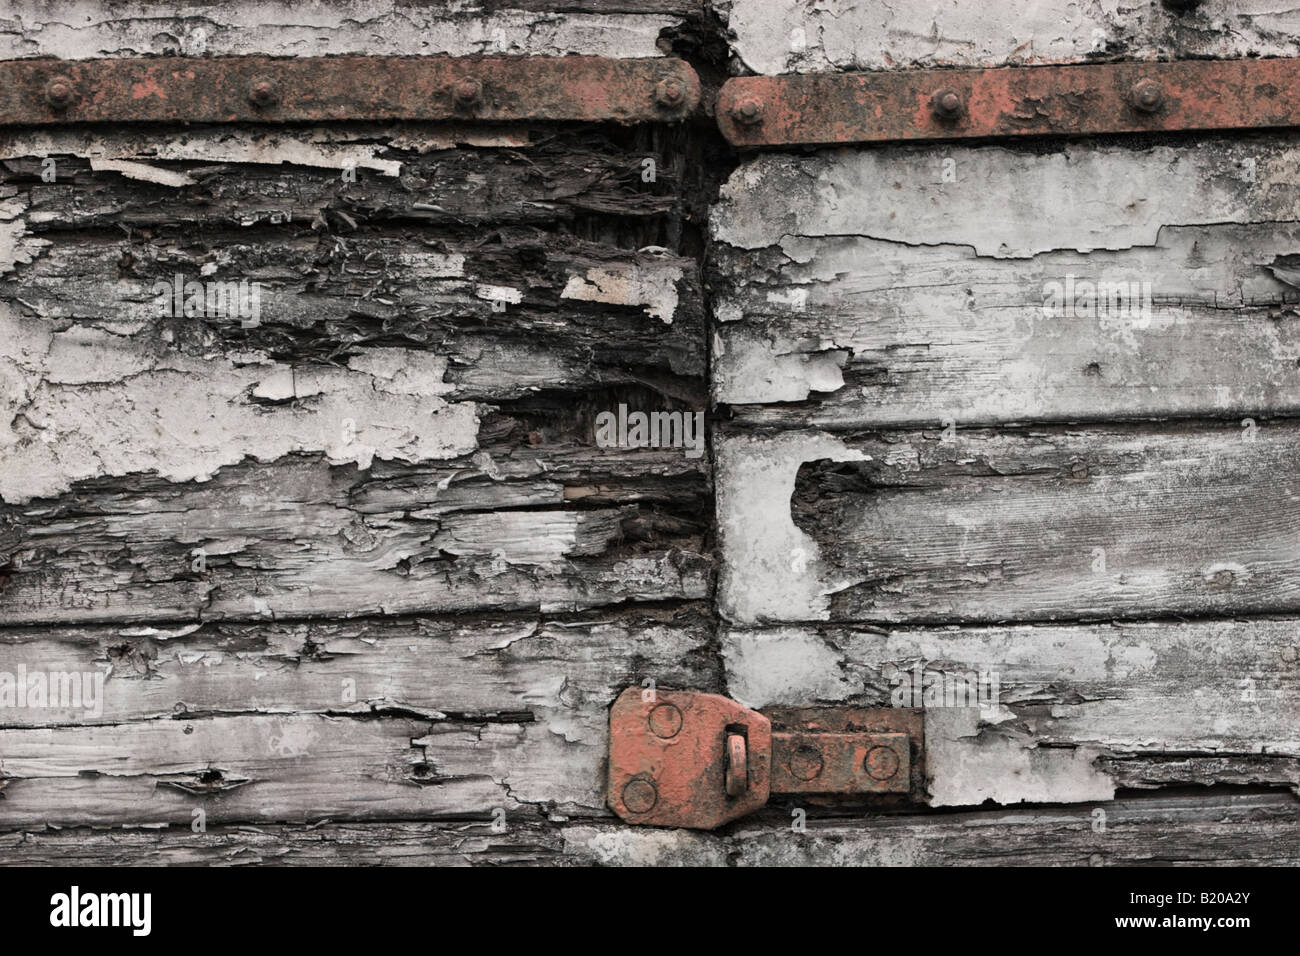 Flaking paint on rotting wood with rusting hinges Stock Photo